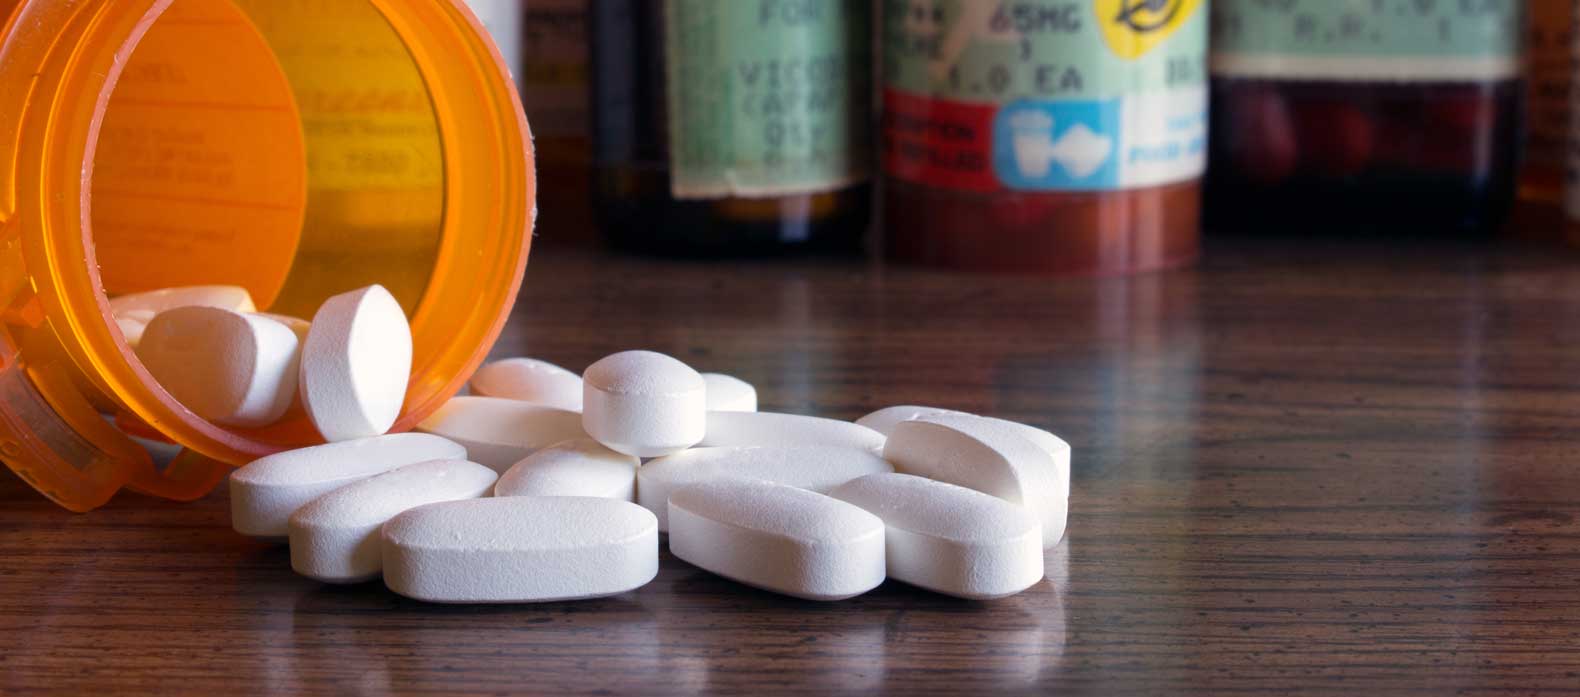 Opioid Use Disorder: What It Is and How It Can Be Treated